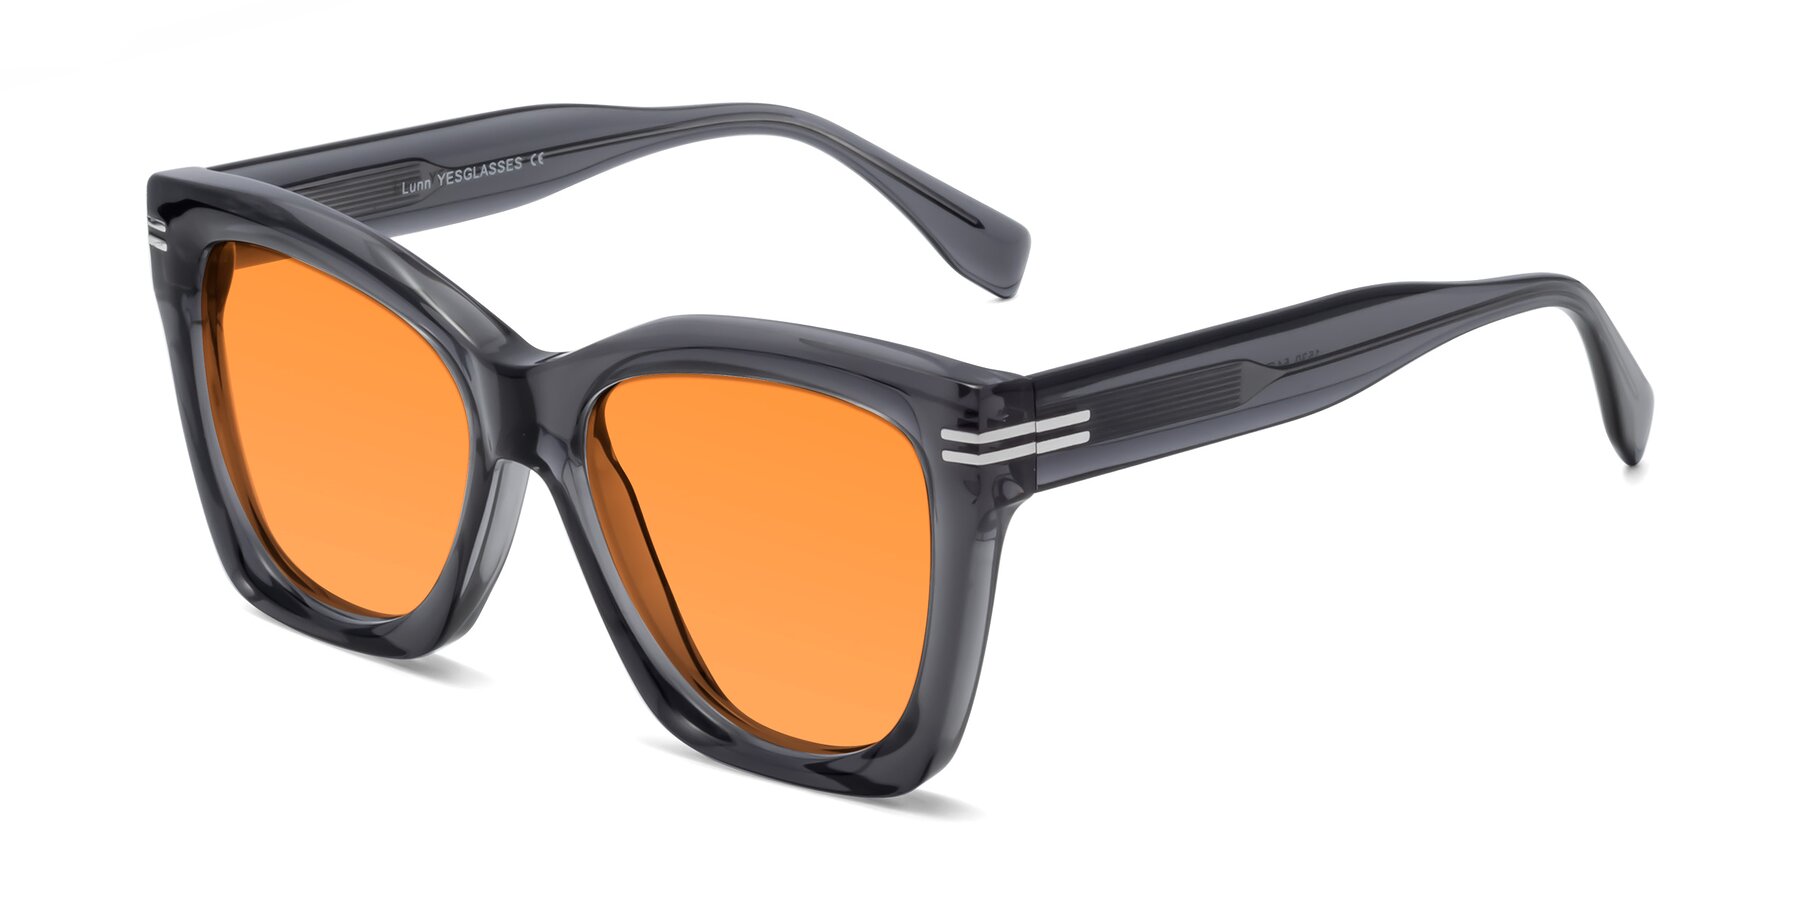 Angle of Lunn in Translucent Gray with Orange Tinted Lenses